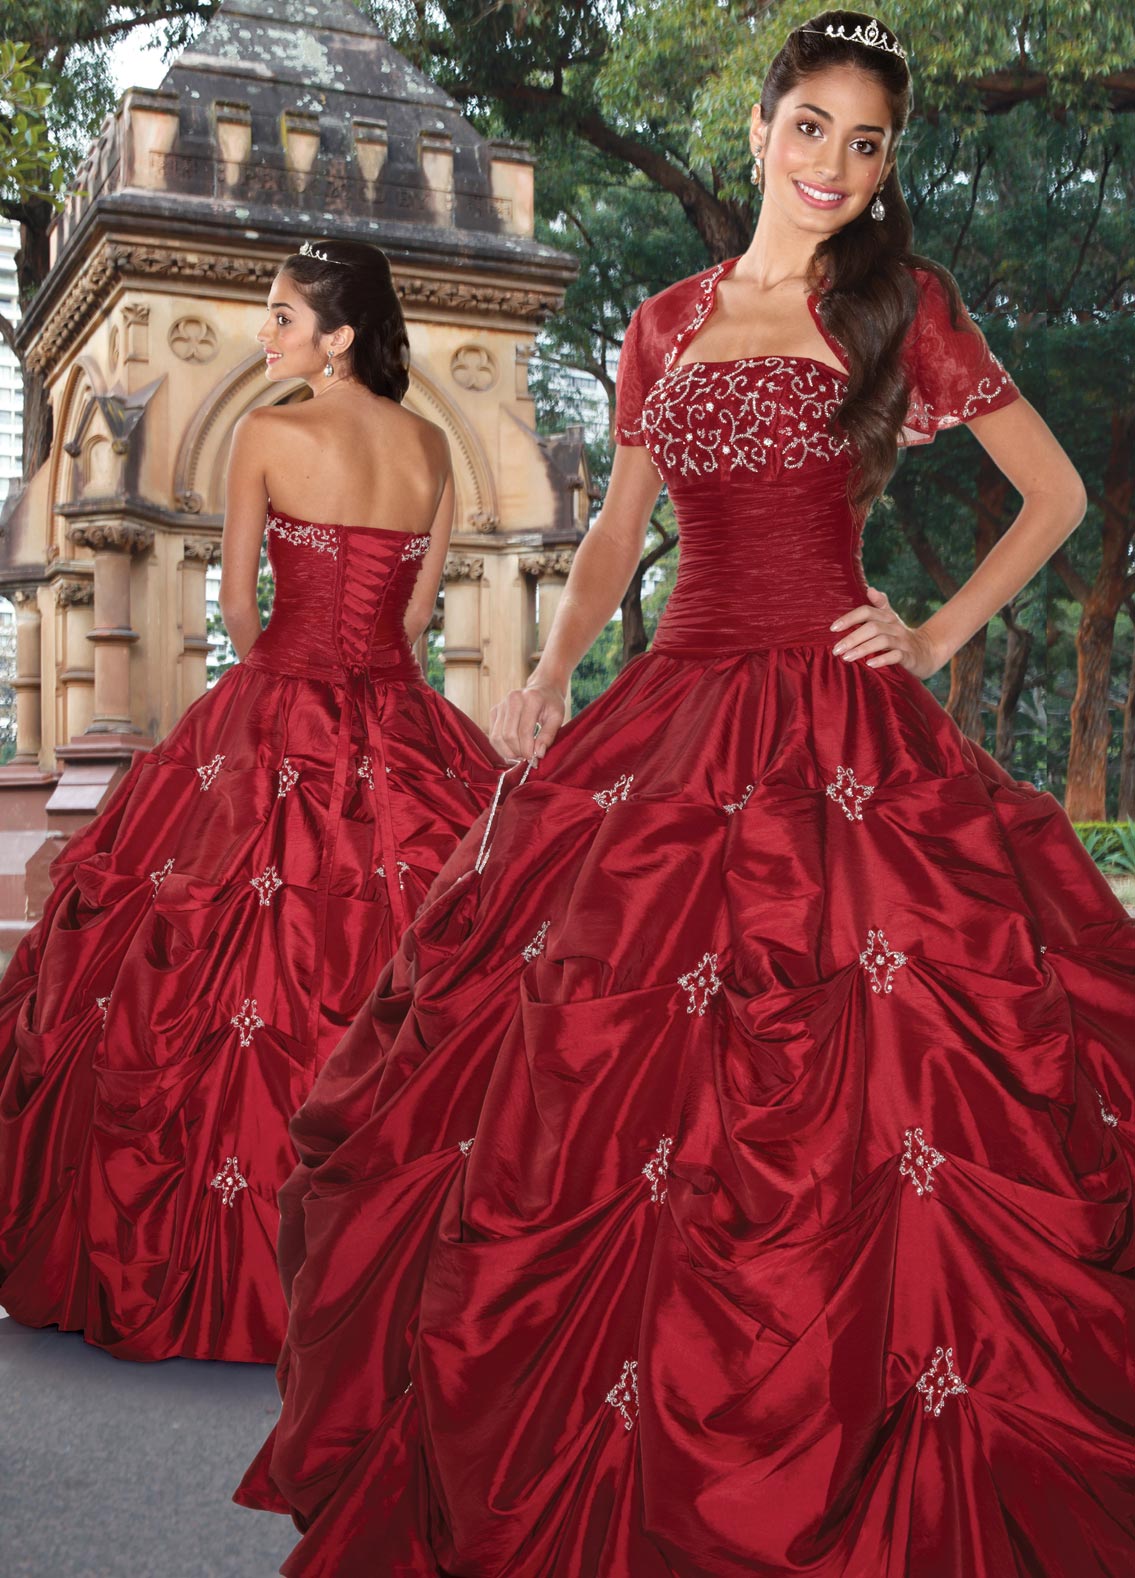 Burgundy Strapless Lace Up Full Length Ball Gown Quinceanera Dresses With Embroidery And Twist Drapes